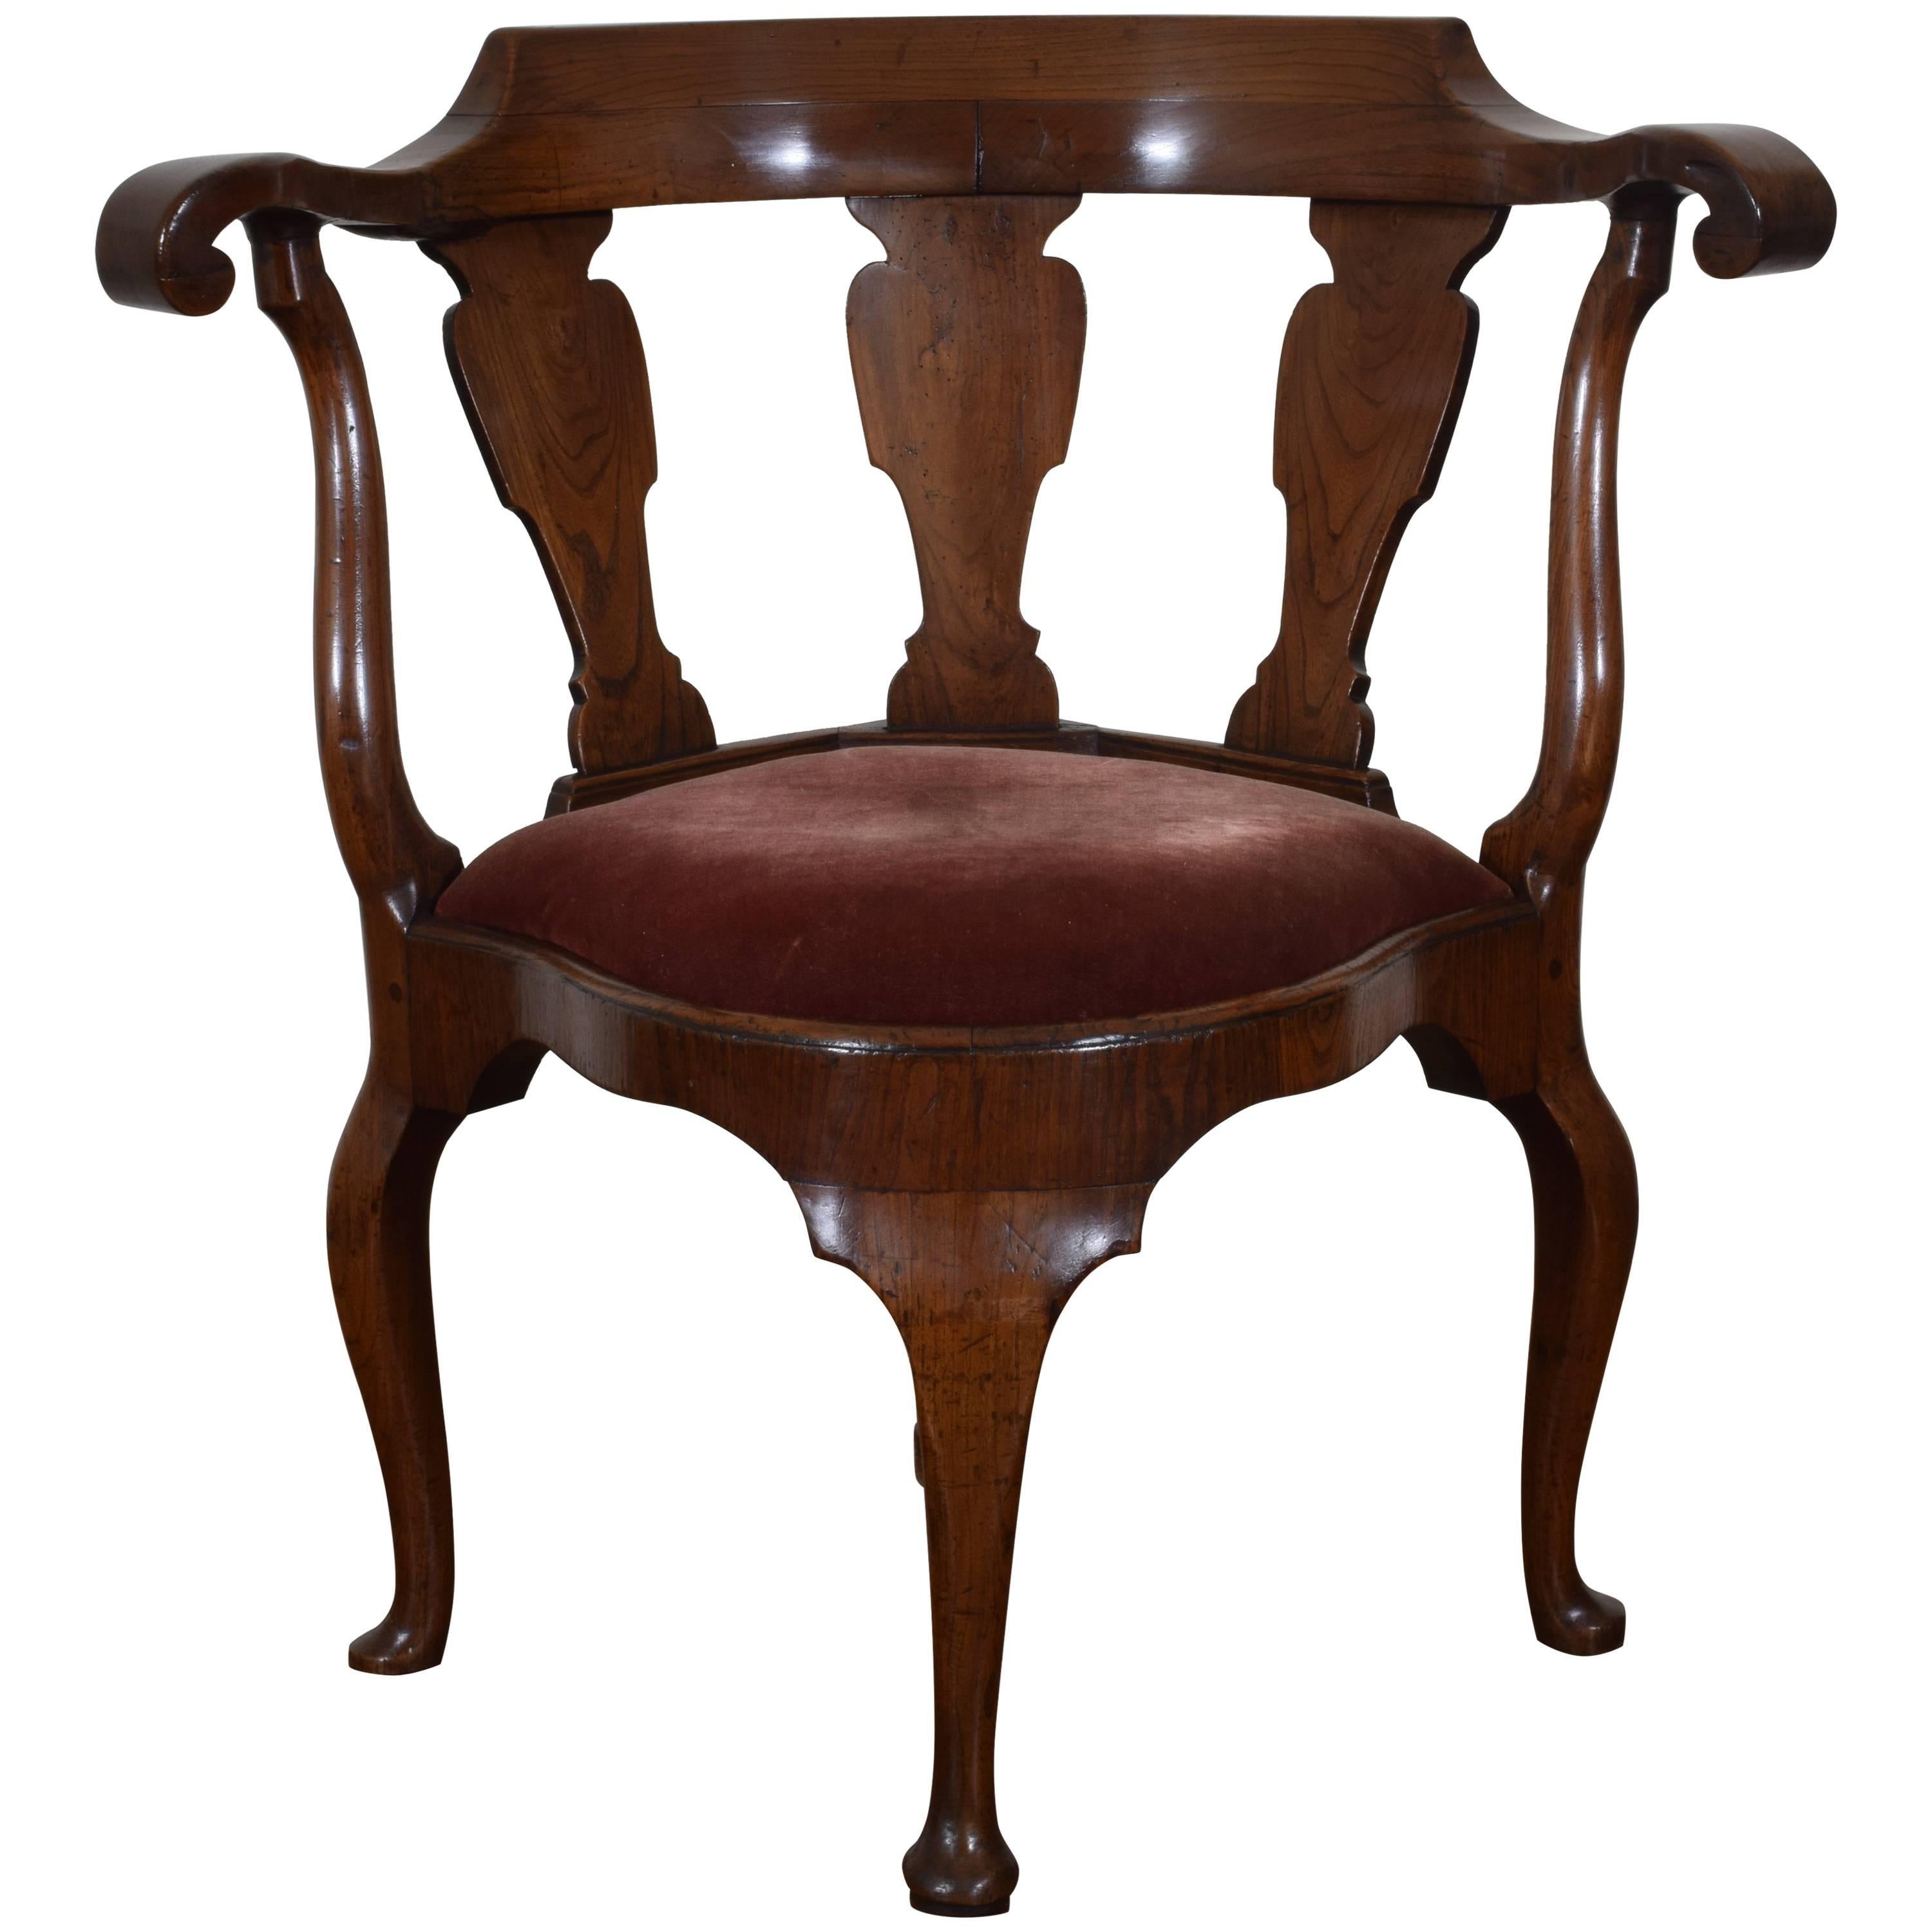 Dutch Yew Wood Corner Chair from the Queen Anne Period, 18th Century